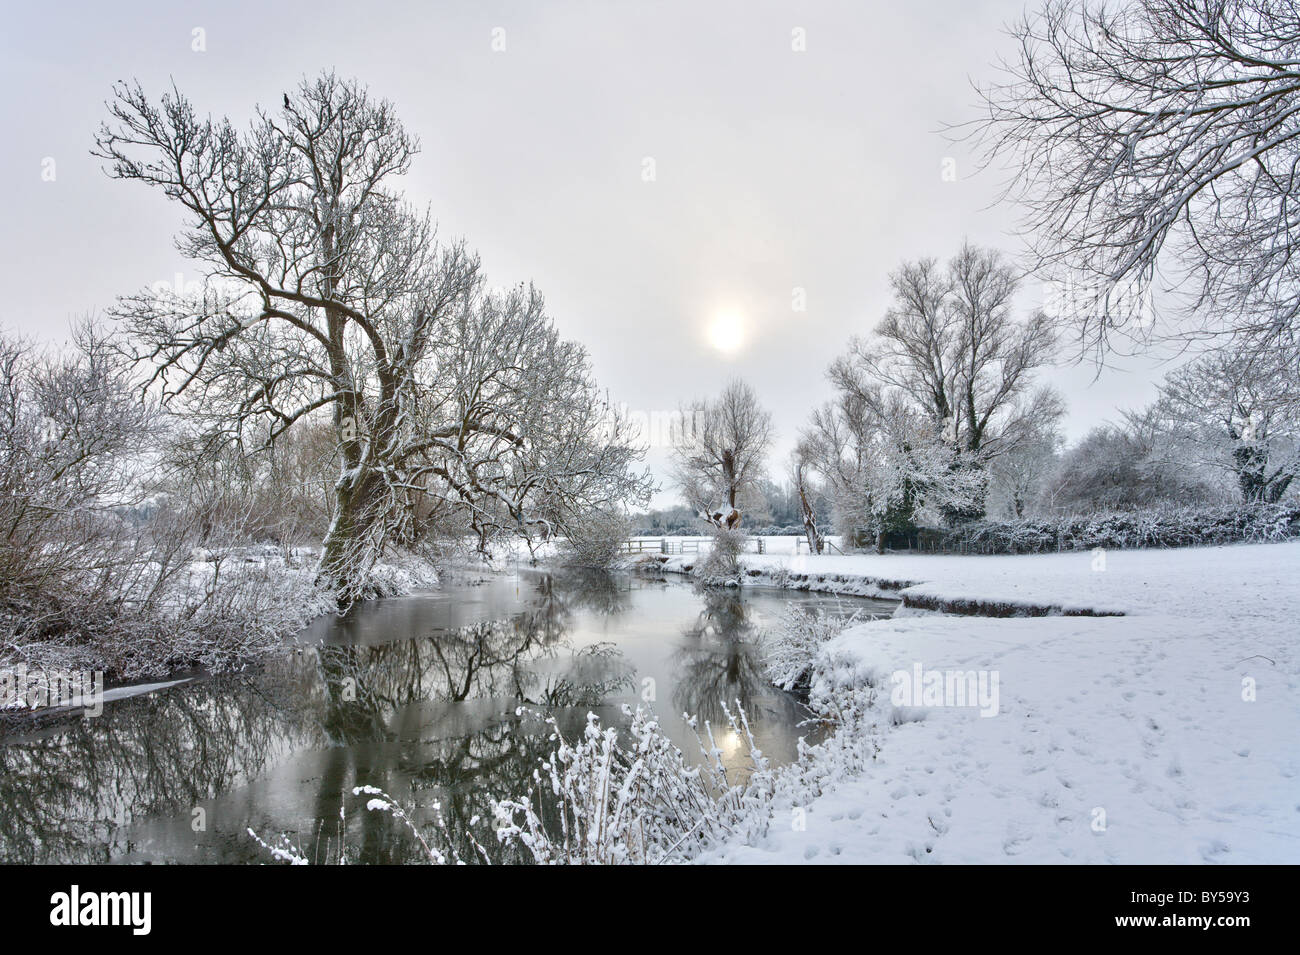 River Cam at Grantchester on the outskirts of Cambridge on a cold winter morning. Snow lying on the ground. Stock Photo